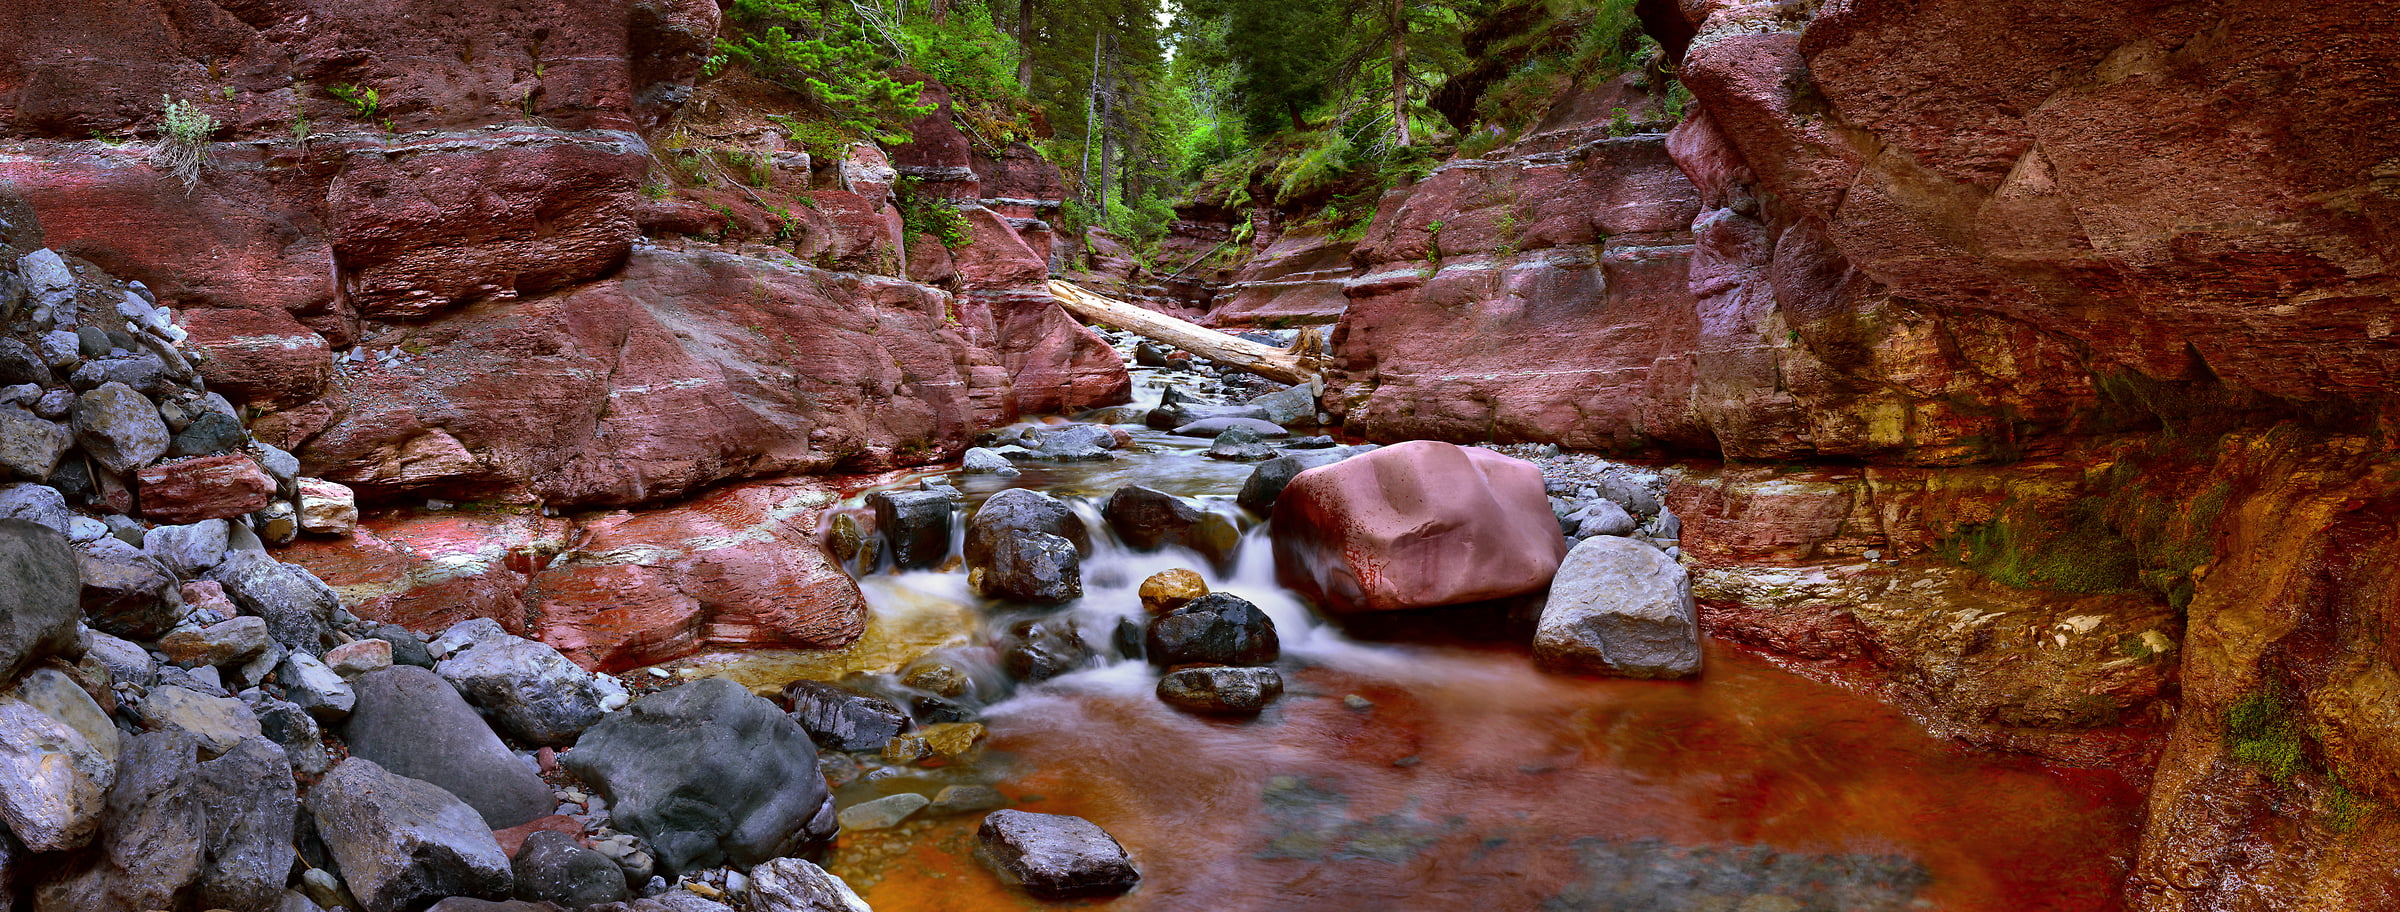 4,741 megapixels! A very high resolution, large-format VAST photo print of a stream, waterfall, and red rocks; fine art nature photo created by Steve Webster in Red Rock Canyon, Waterton Lakes National Park, Alberta Canada.